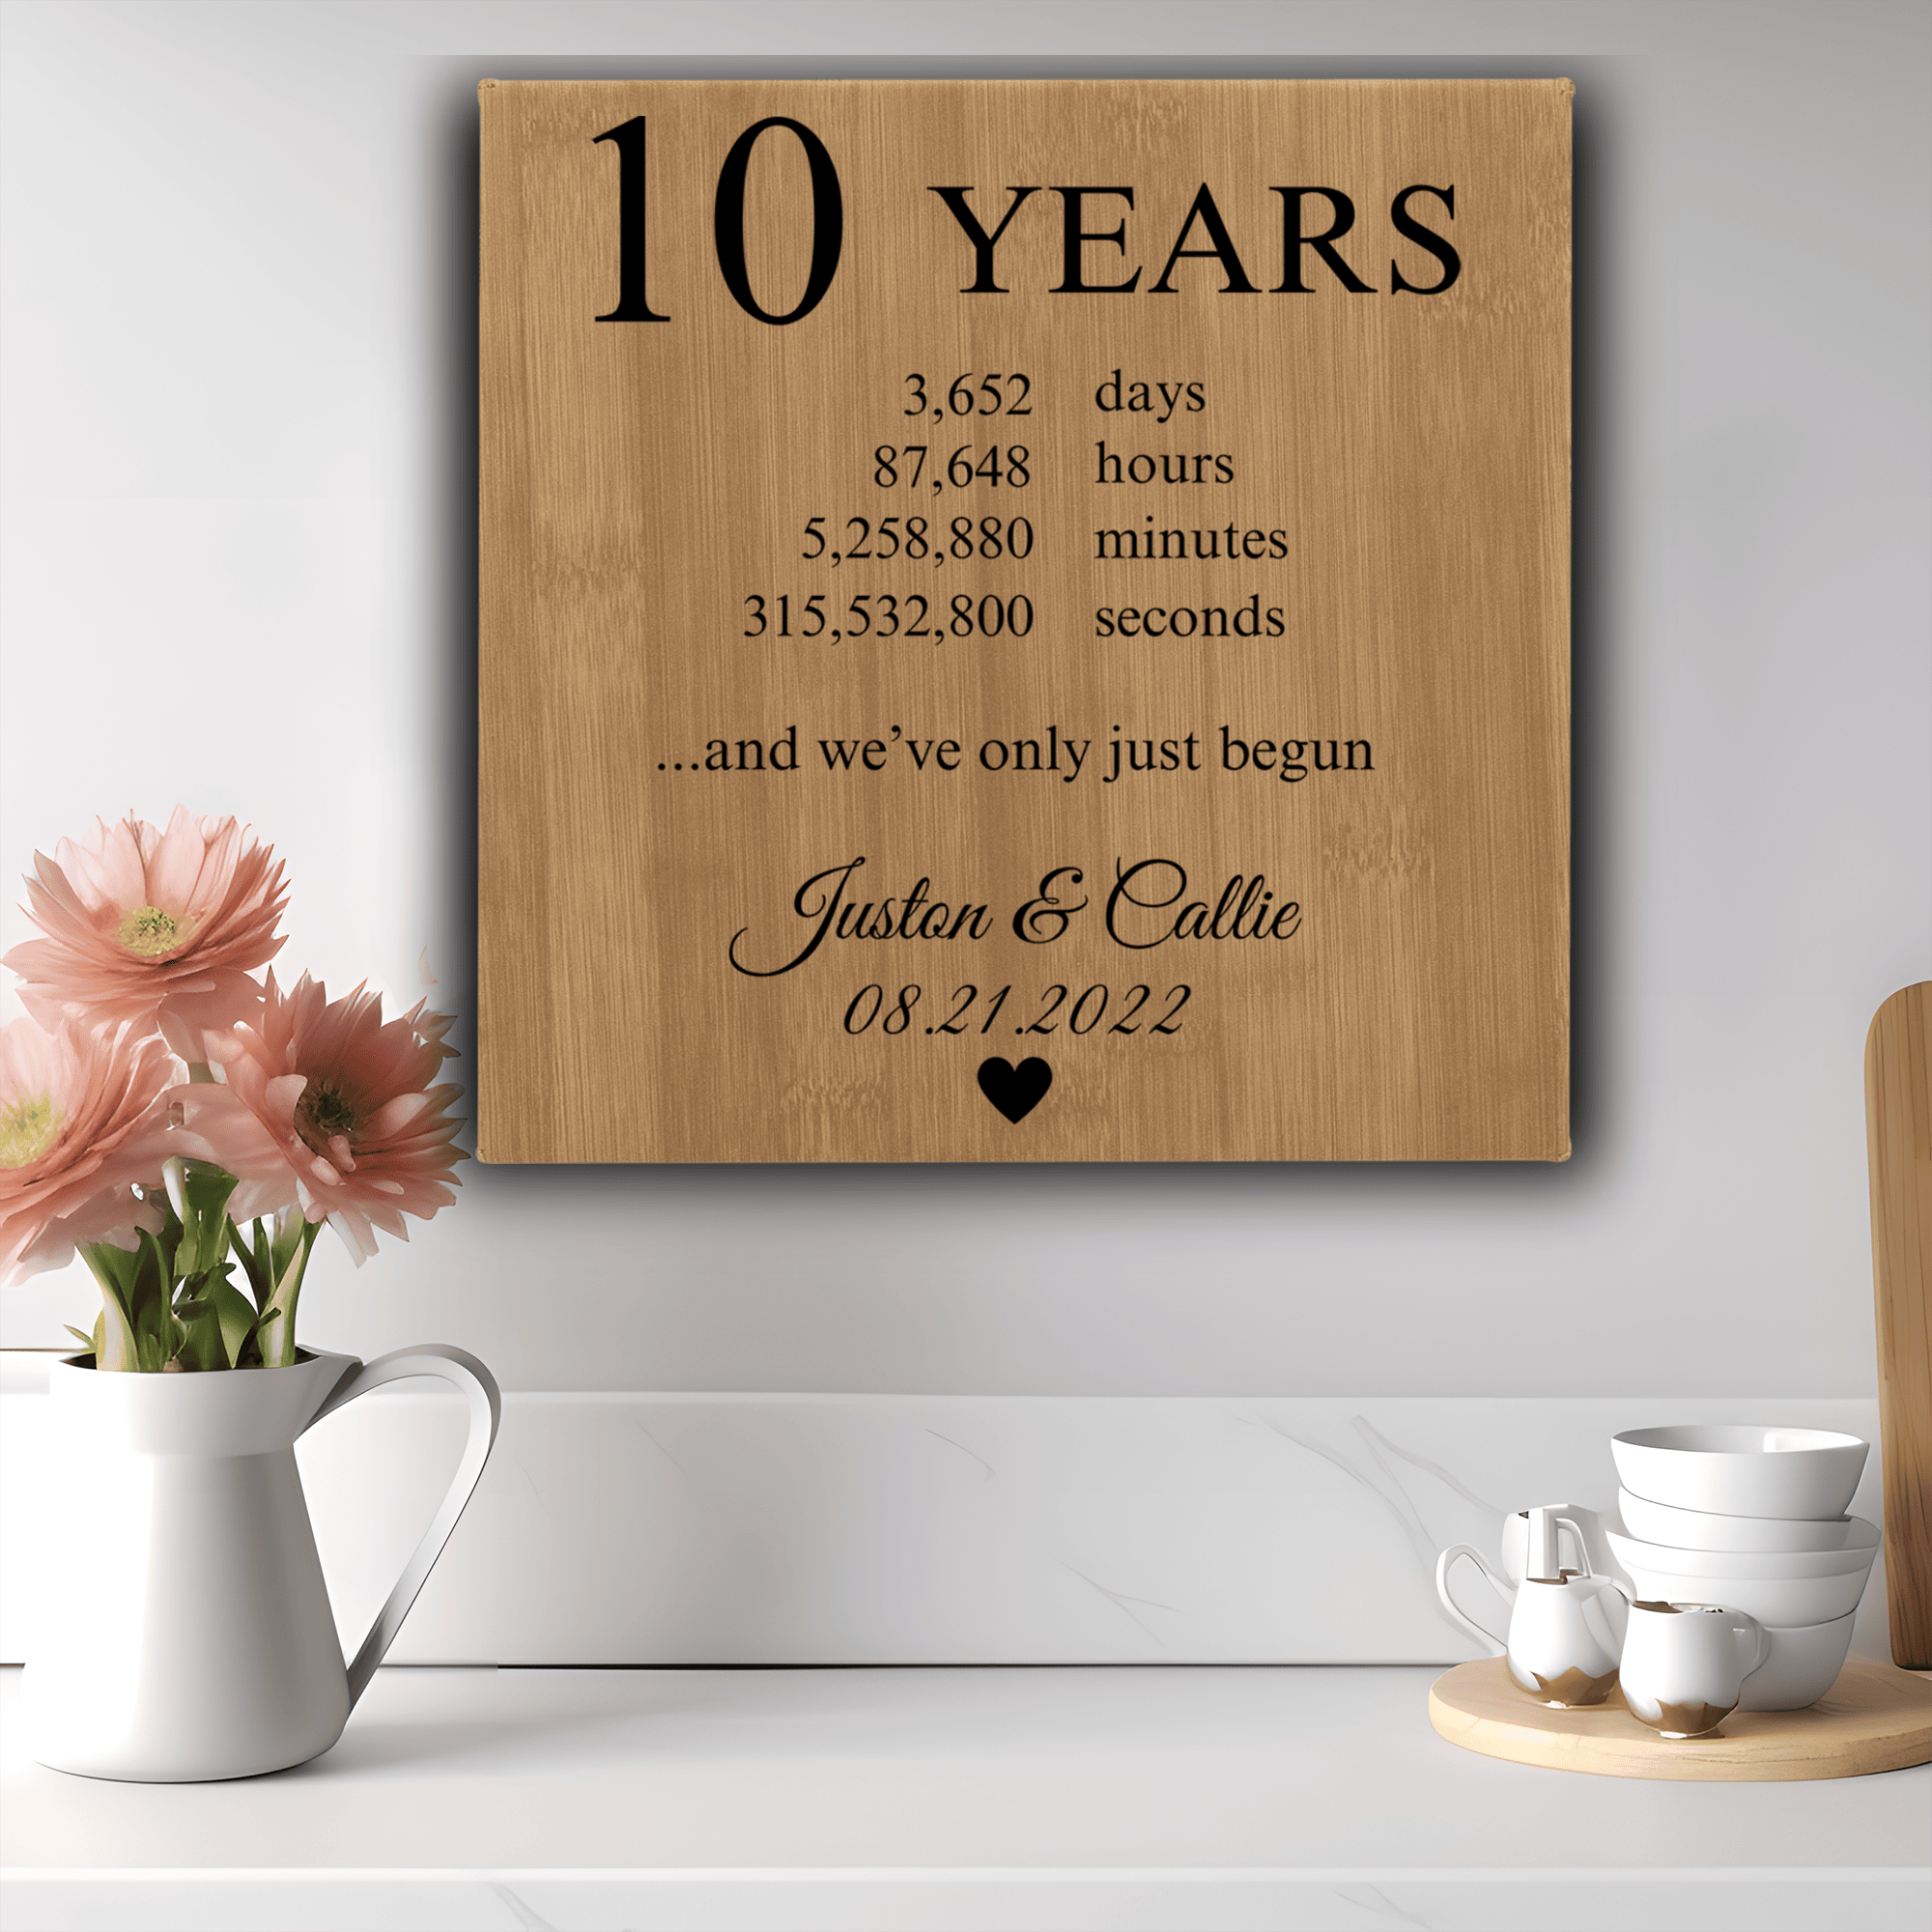 Bamboo Leather Wall Decor With 10 Year Anniversary Design